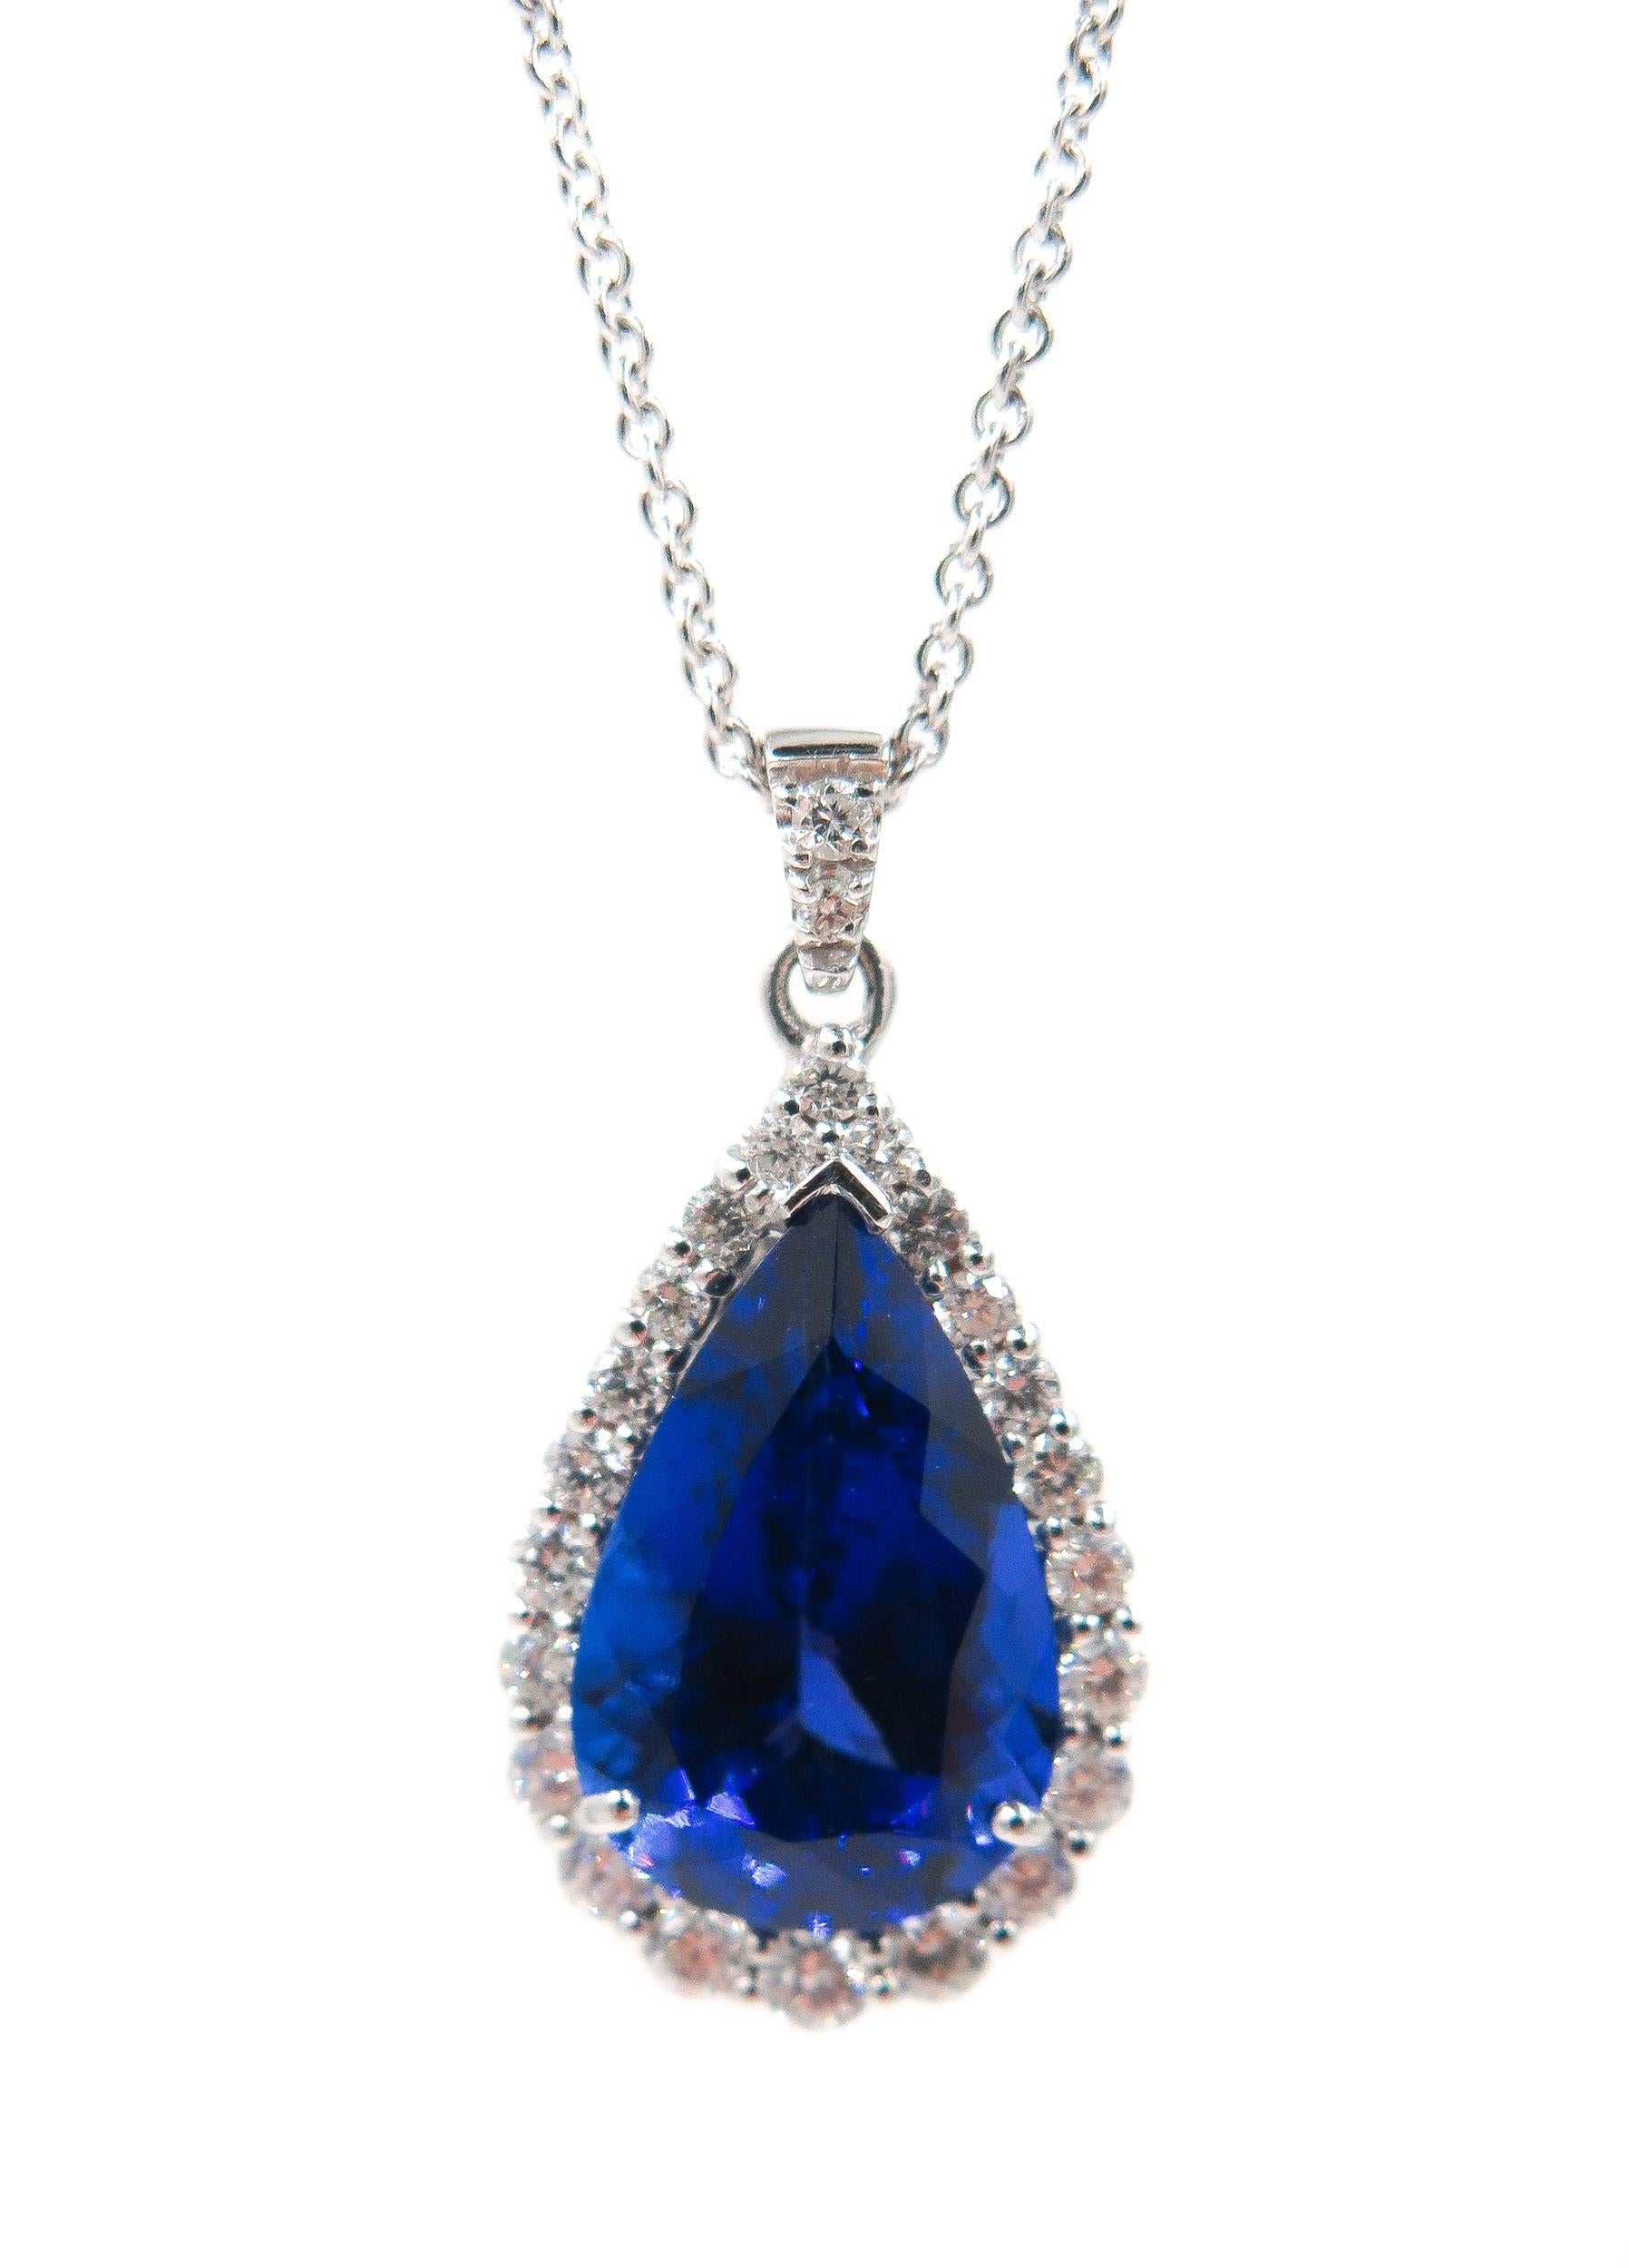 Looking for a jaw-dropping pendant? Look no further.
A wonderful addition to anyone’s jewelry box, this pear shaped diamond and tanzanite pendant needs a loving home!! It’s hobbies include sparkling, accepting compliments, and brightening people’s